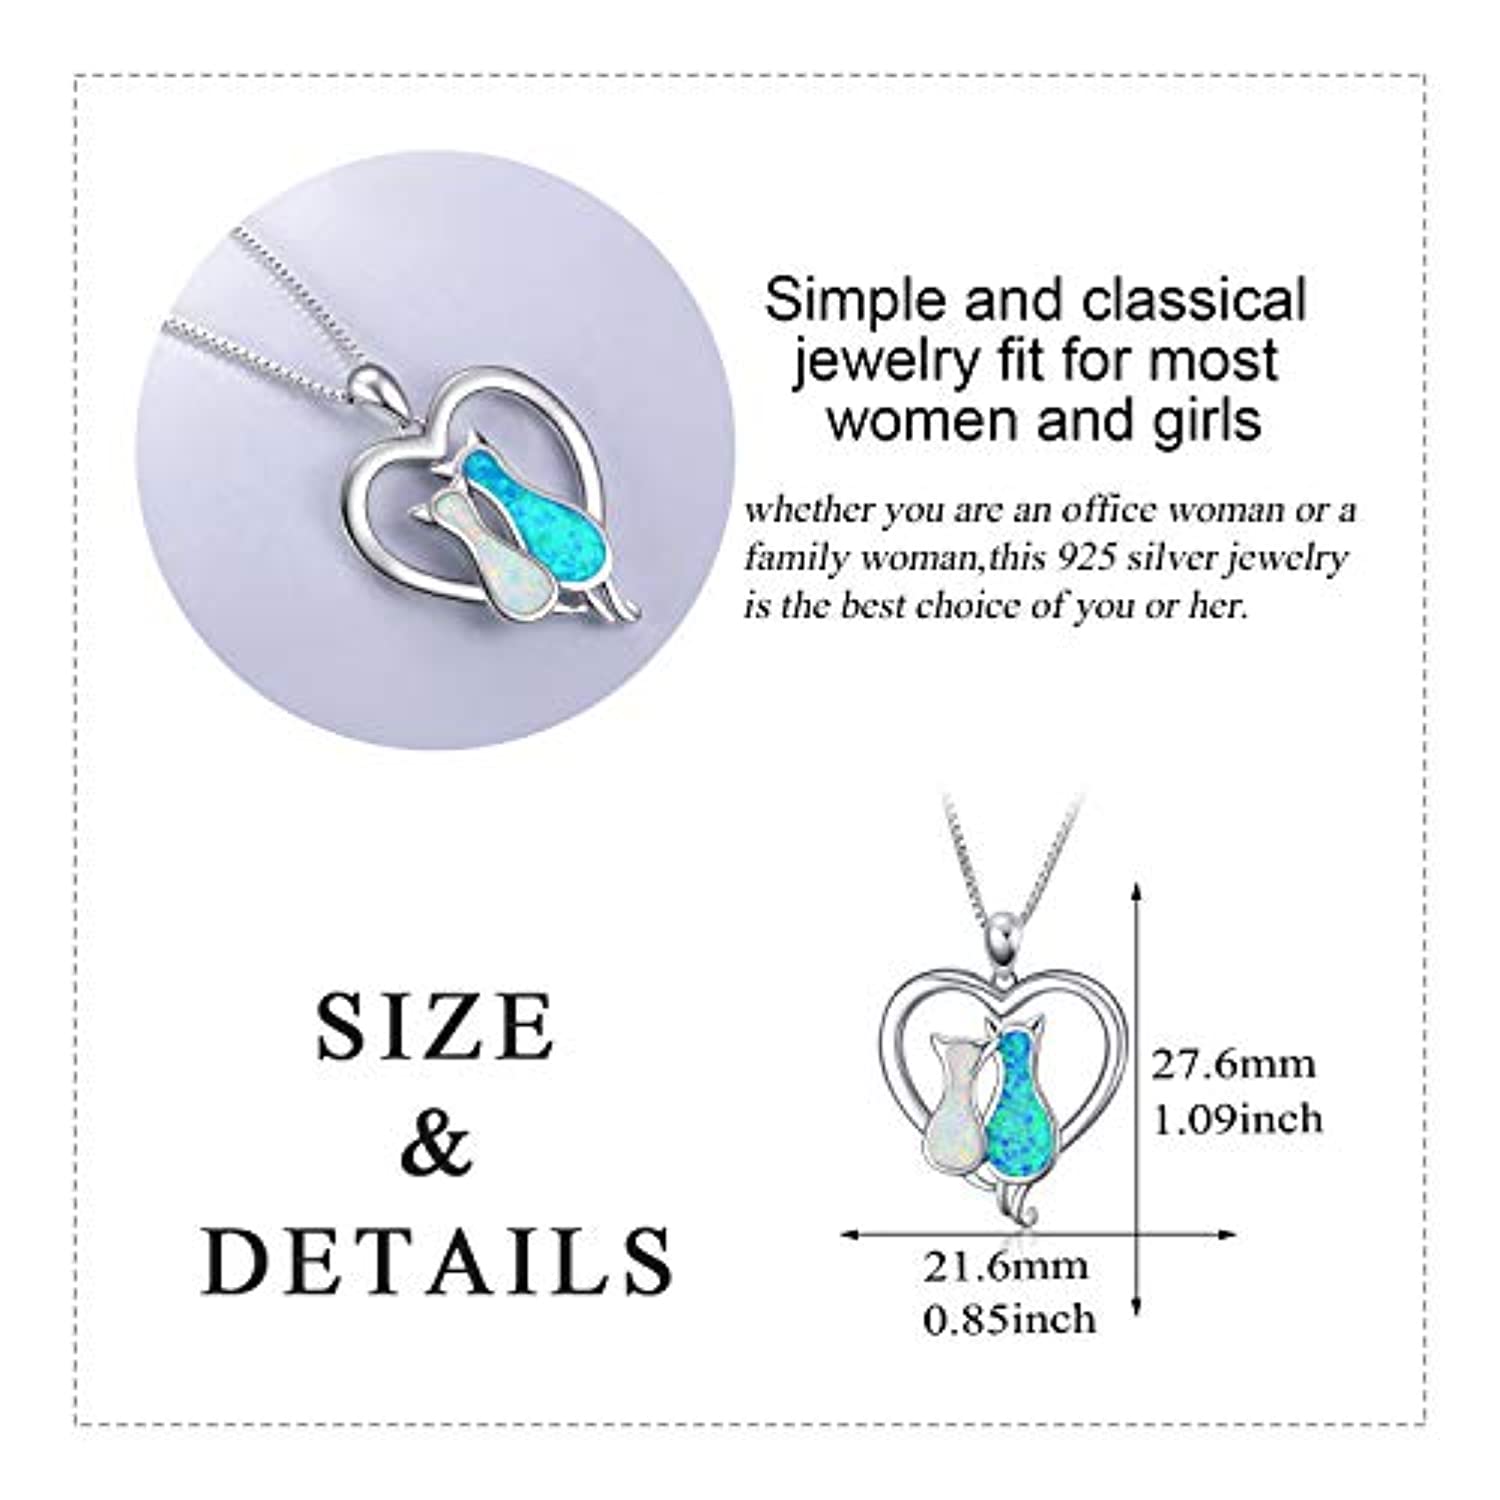 Angel caller Cat Necklaces 925 Sterling Silver Jewelry Cute Double Two-Tone Cat Pendant Cubic Zirconia Necklace Rolo Chain,Eternal Love Heart Necklace for Women,Girls